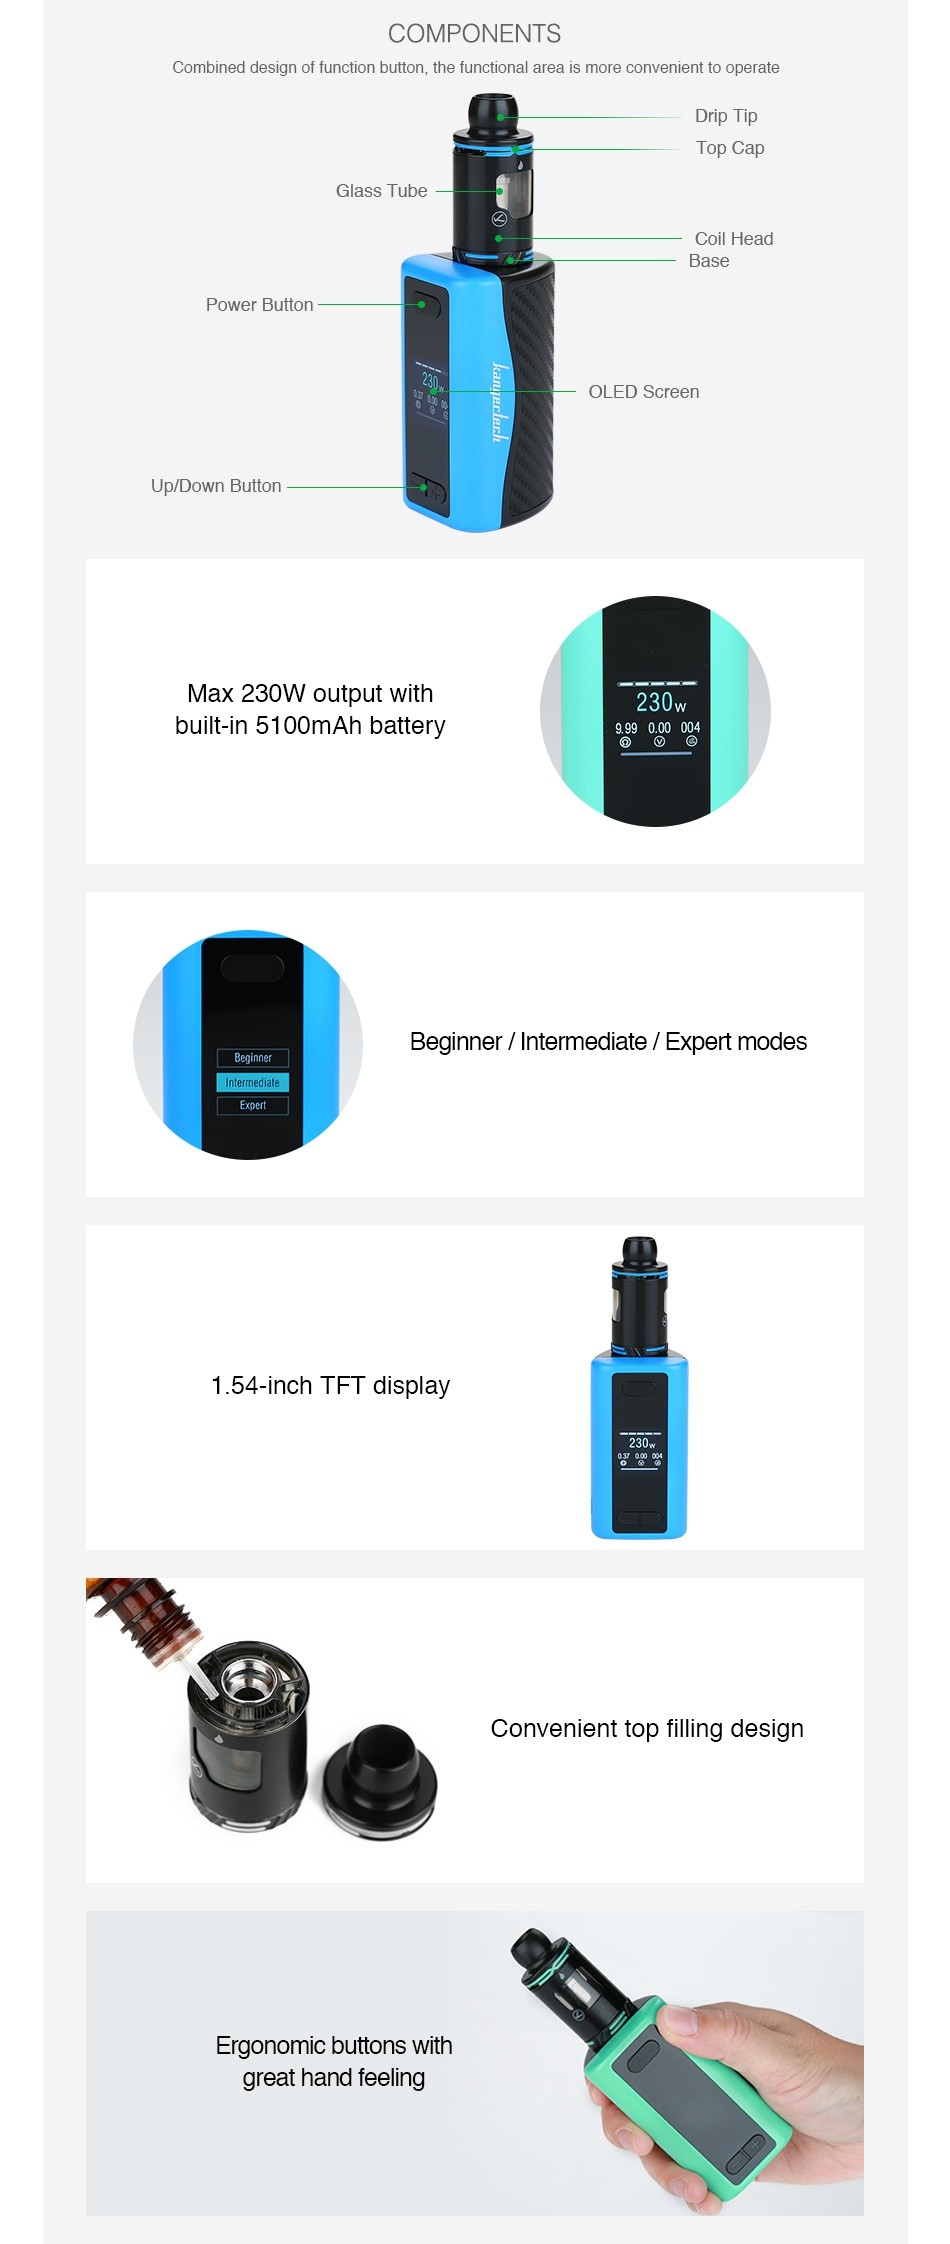 Kangertech IKEN 230W TC Kit 5100mAh COMPONENTS Combined dcsign of function button  tho functiona arca is morc convenient to operato Base Power button Up Down Button Max 230w output with built in 5100mAh battery 9c90 00004 Beginner  Intermediate Expert modes 1 54 inch TFT display Convenient top filing design genom great hand feeling